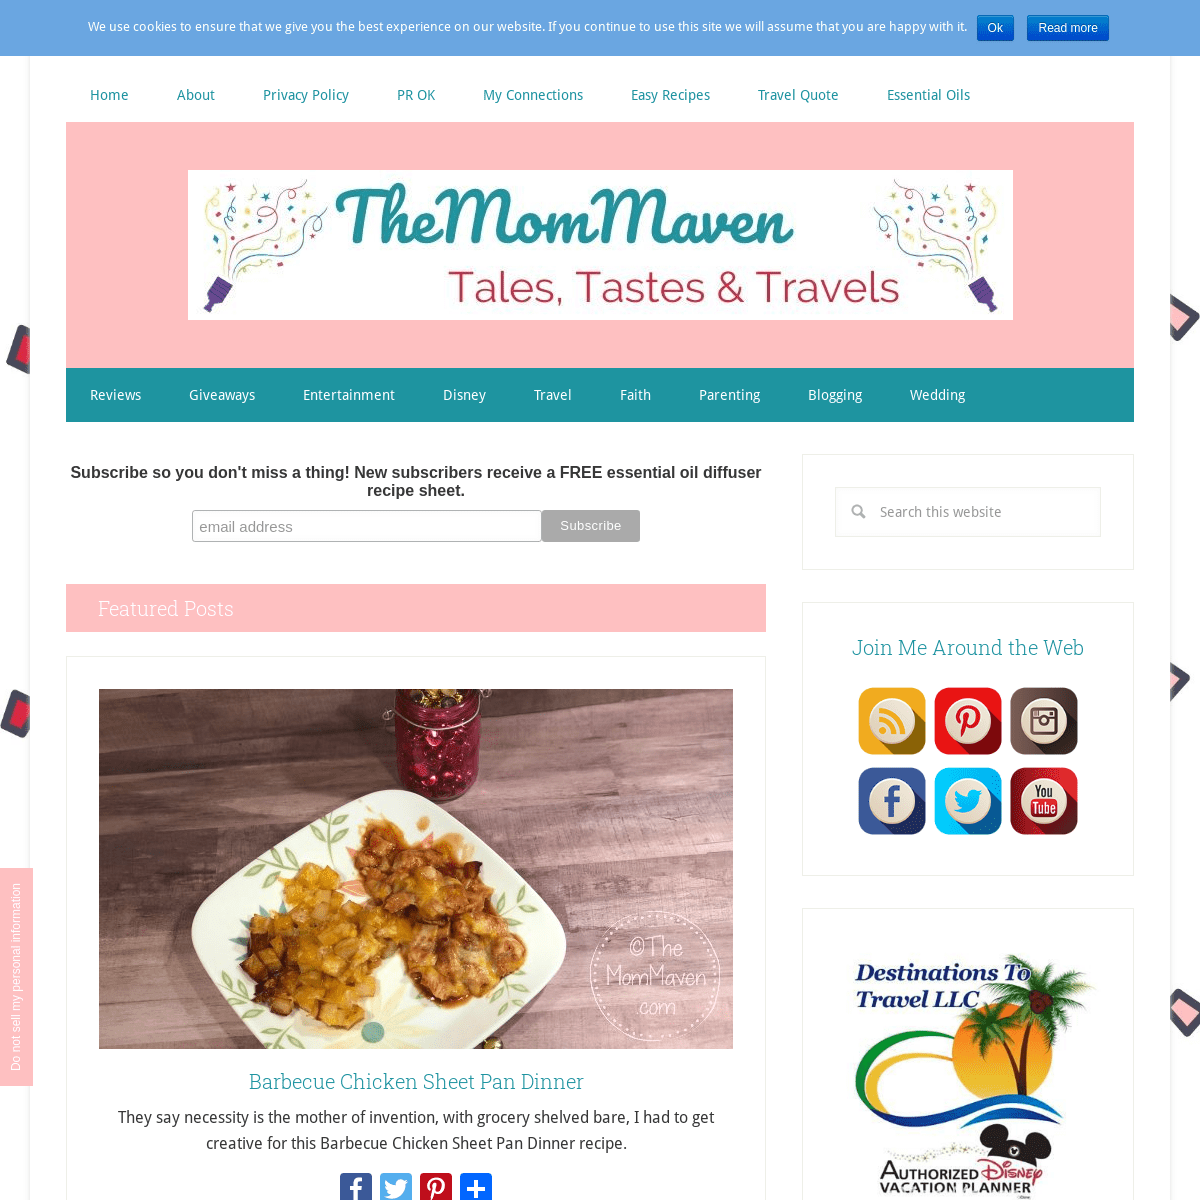 A complete backup of themommaven.com